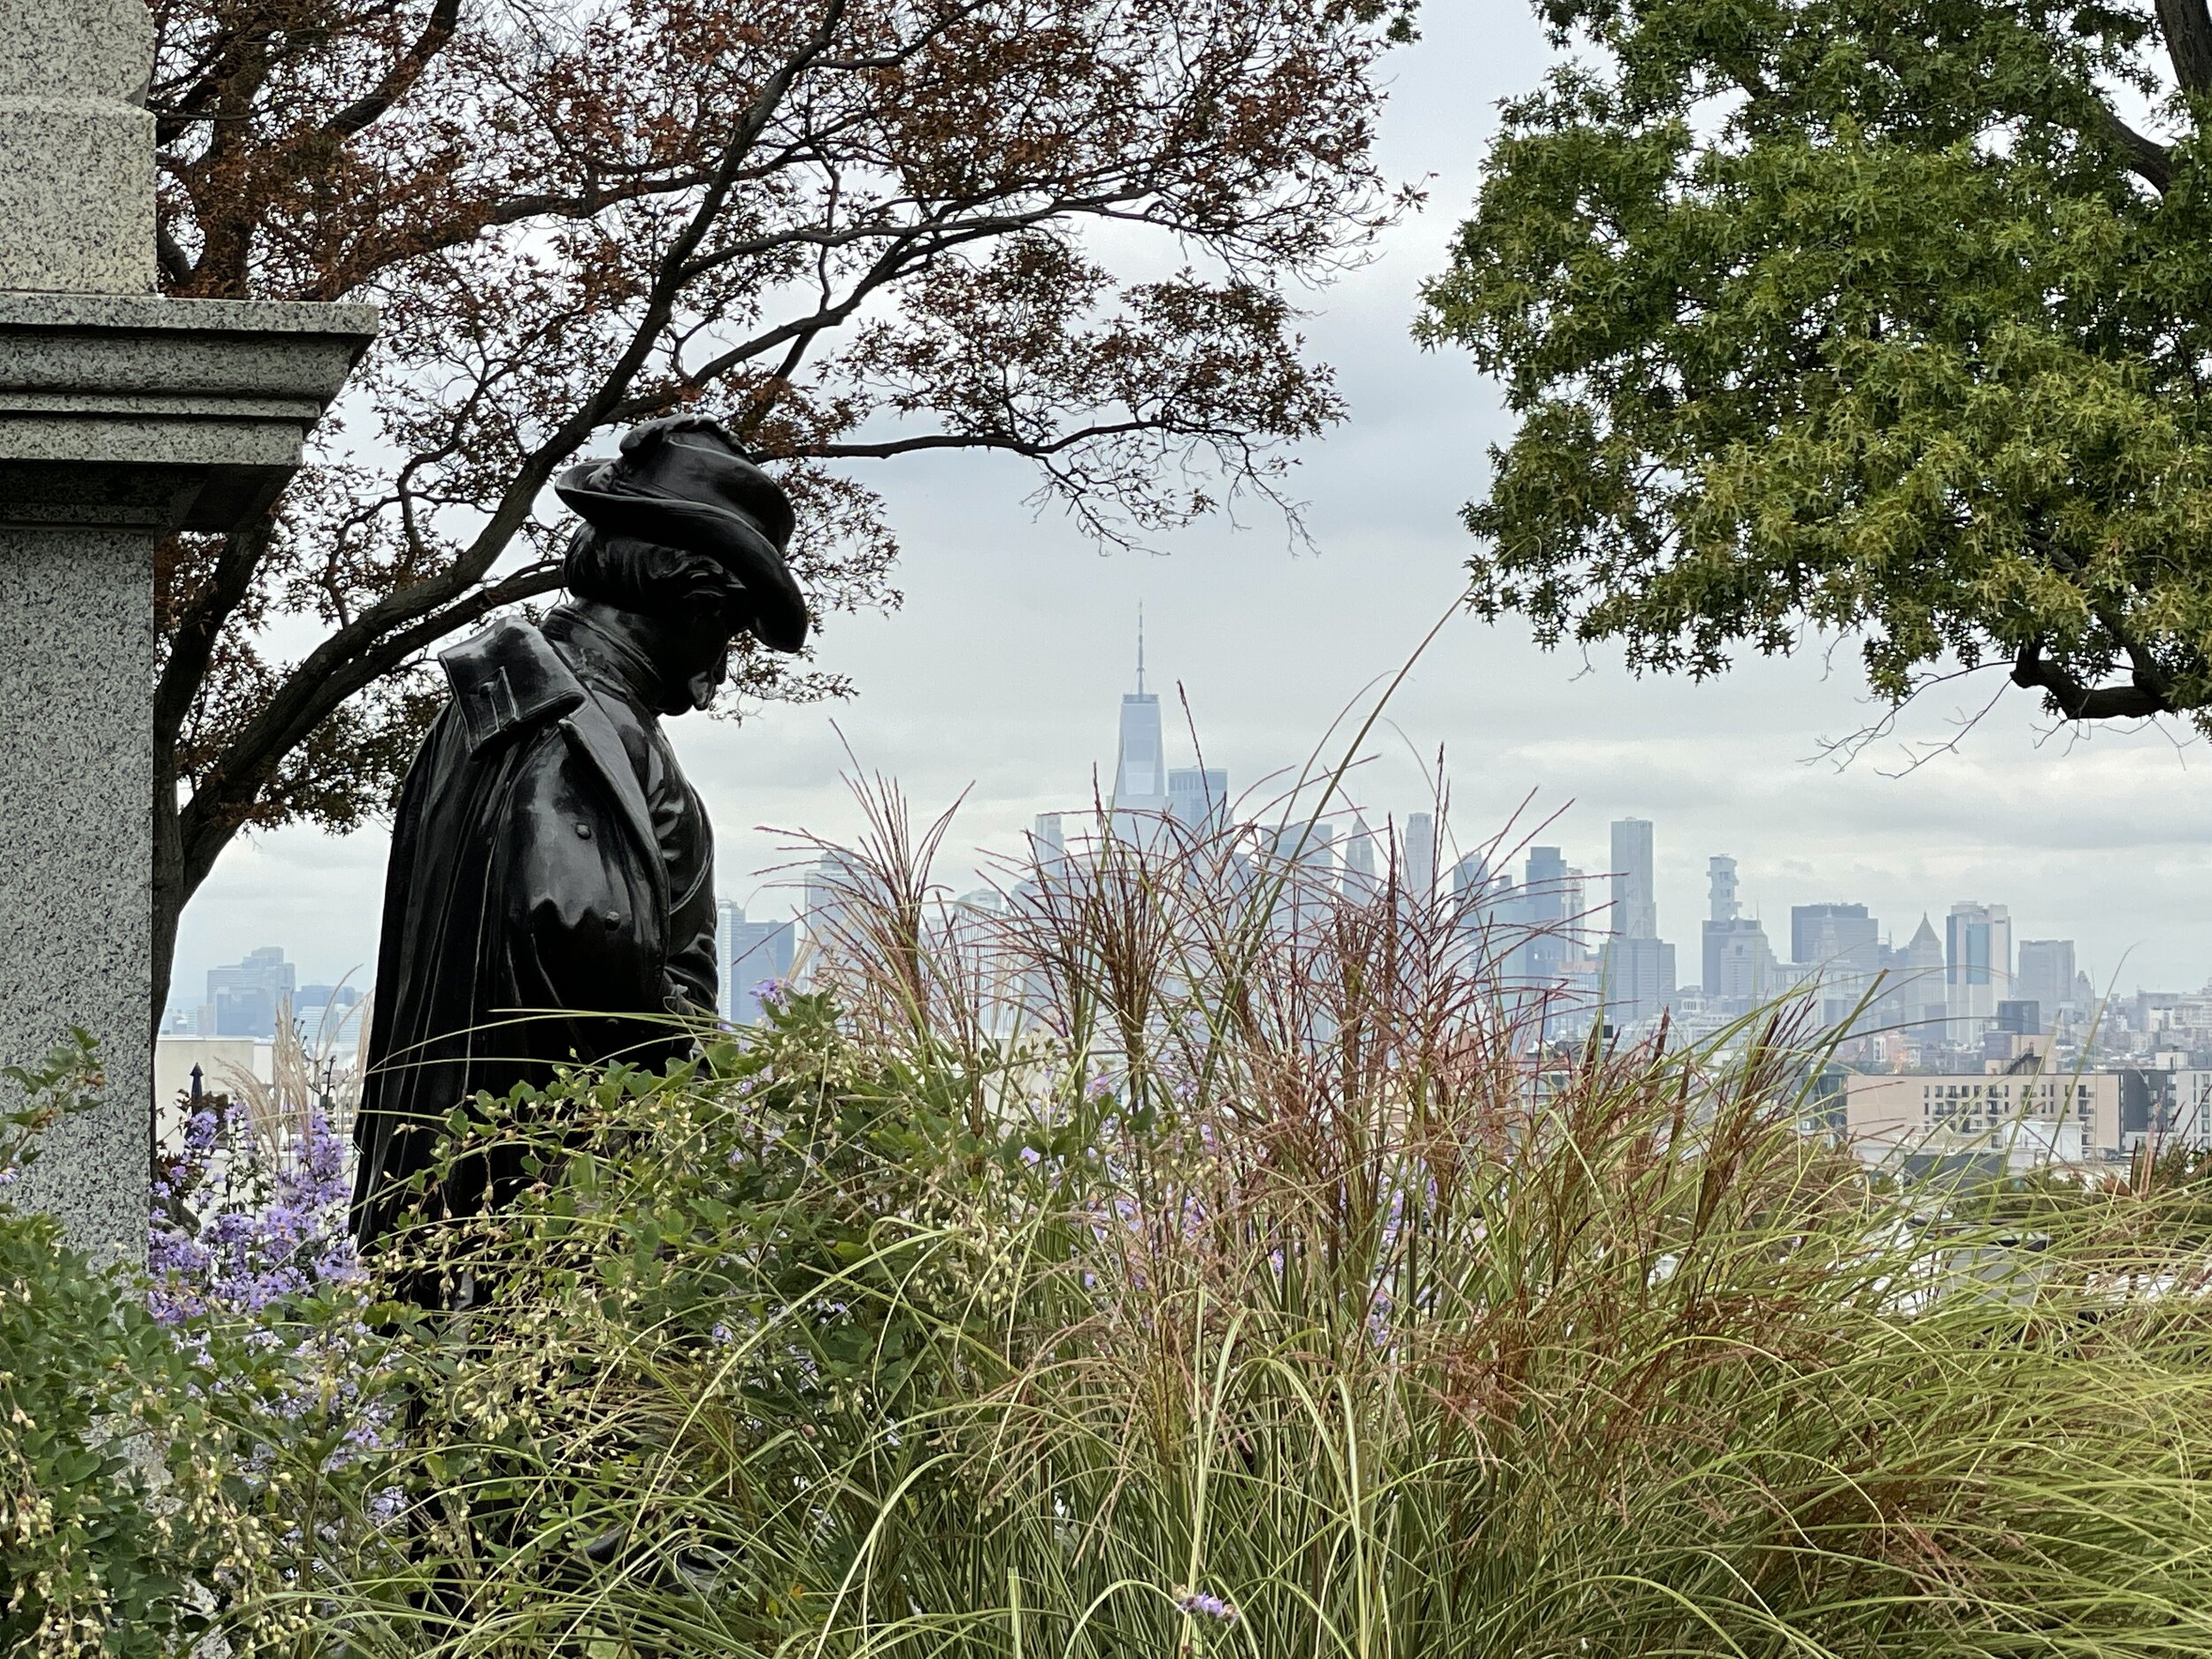 Green-Wood Cemetery's Civil War Soldiers' Monument, on the highest point in Brooklyn.